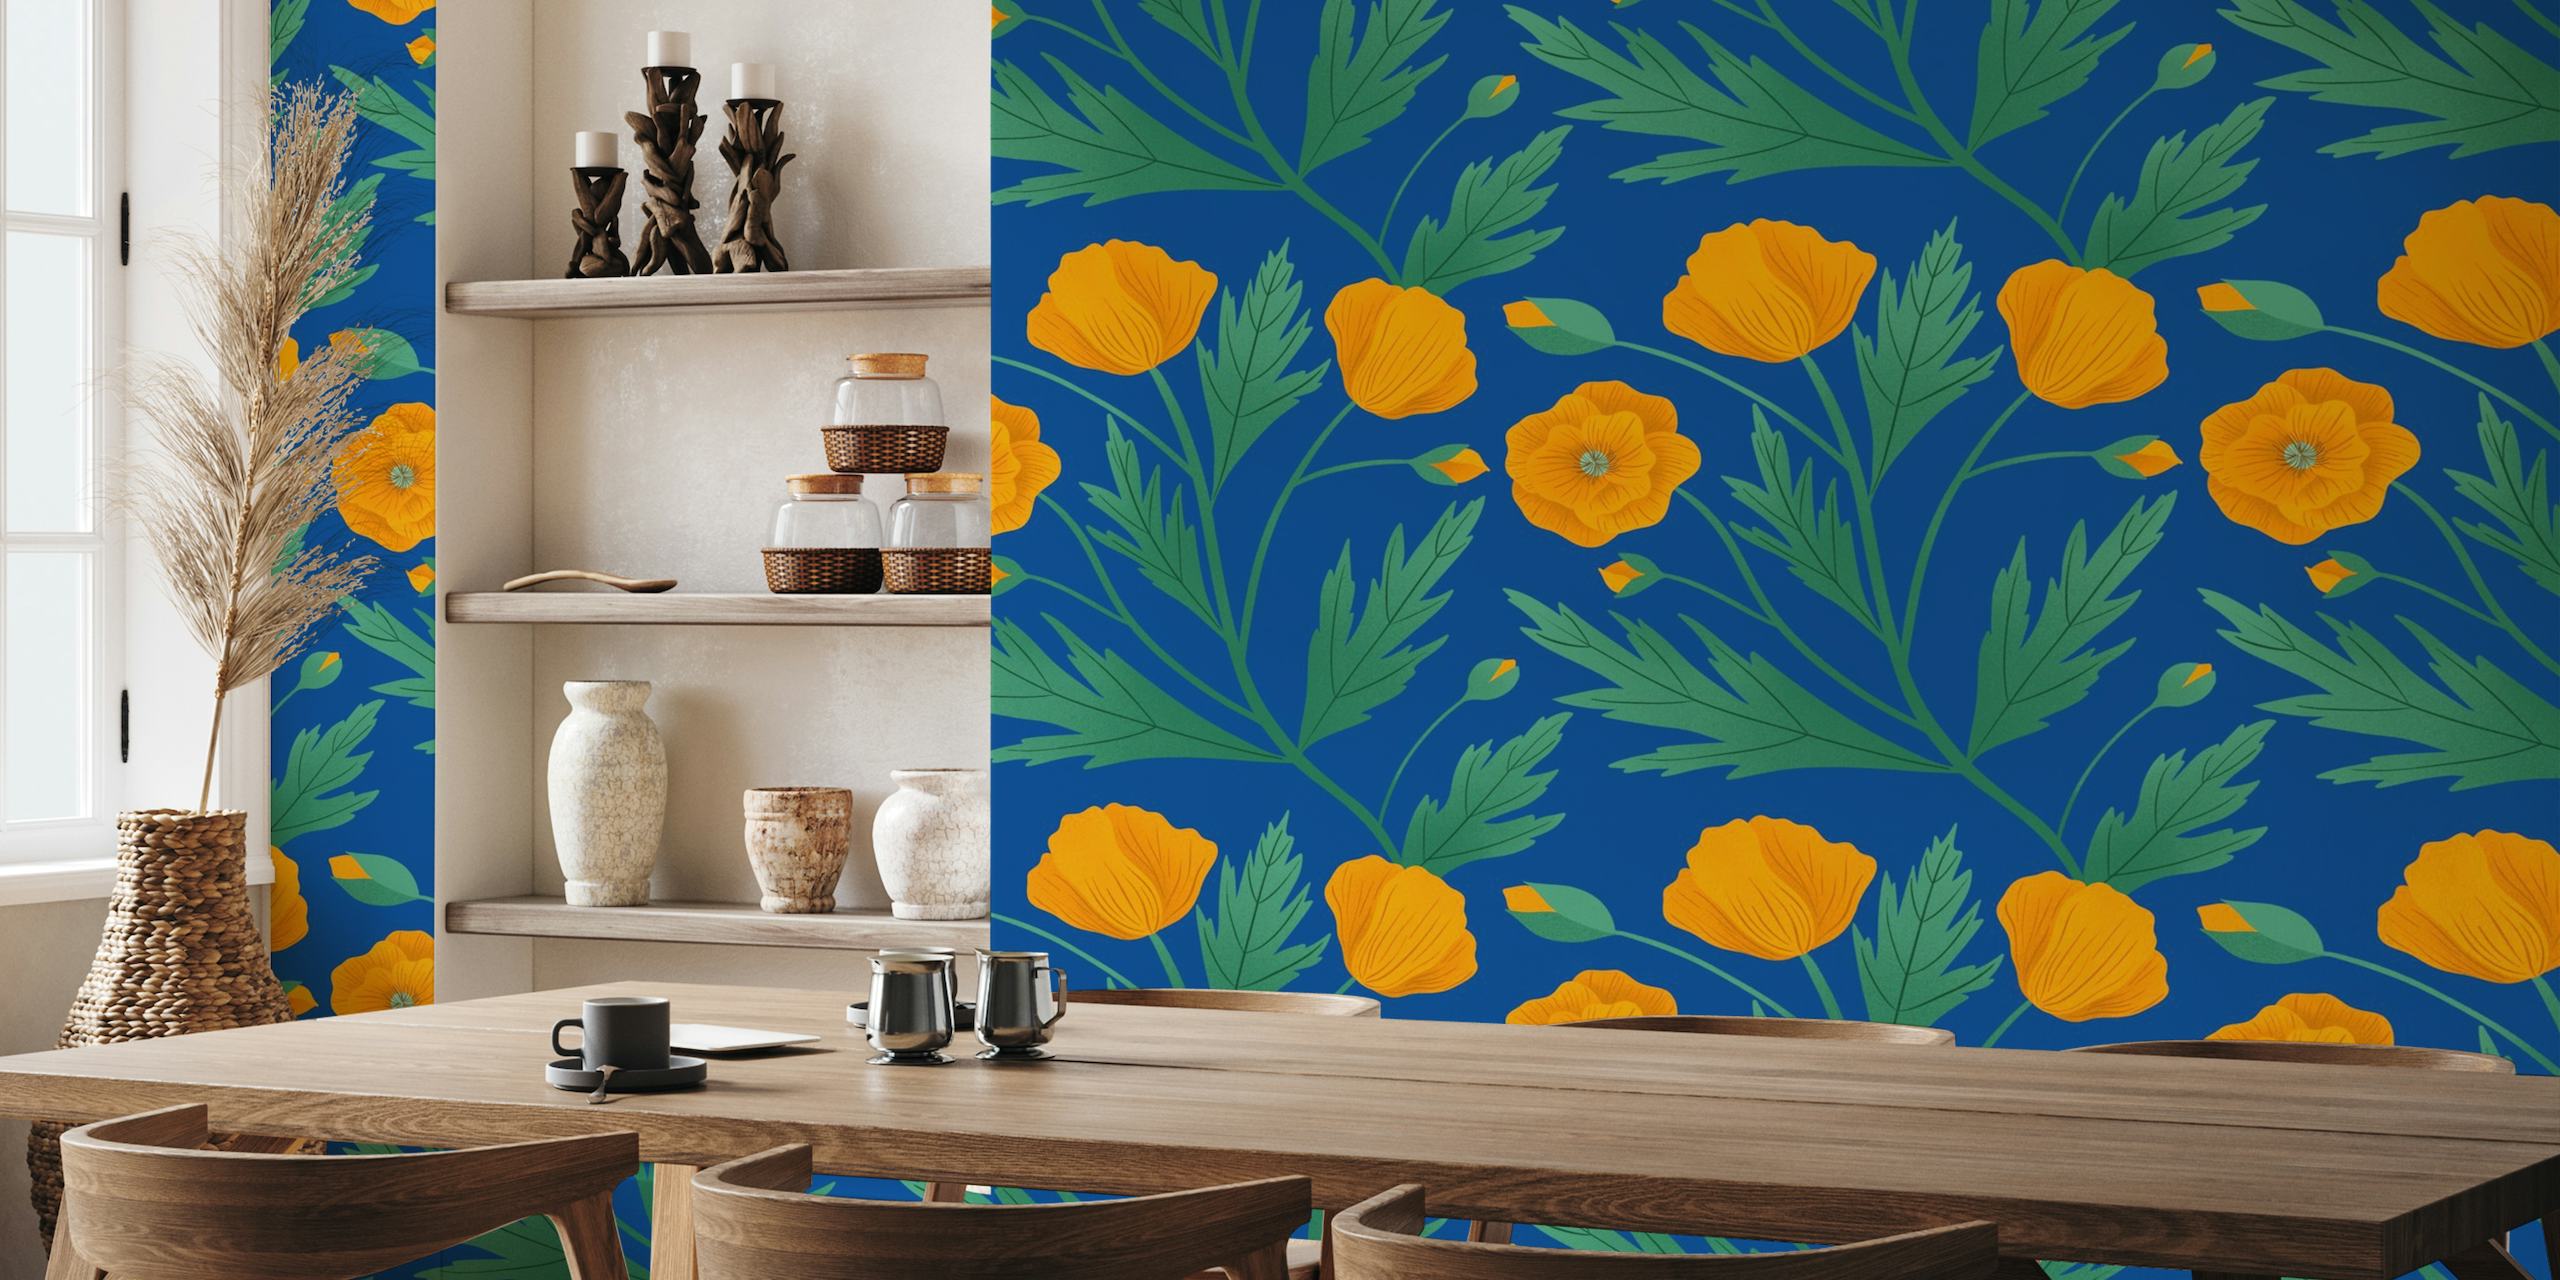 California Poppies on Blue behang